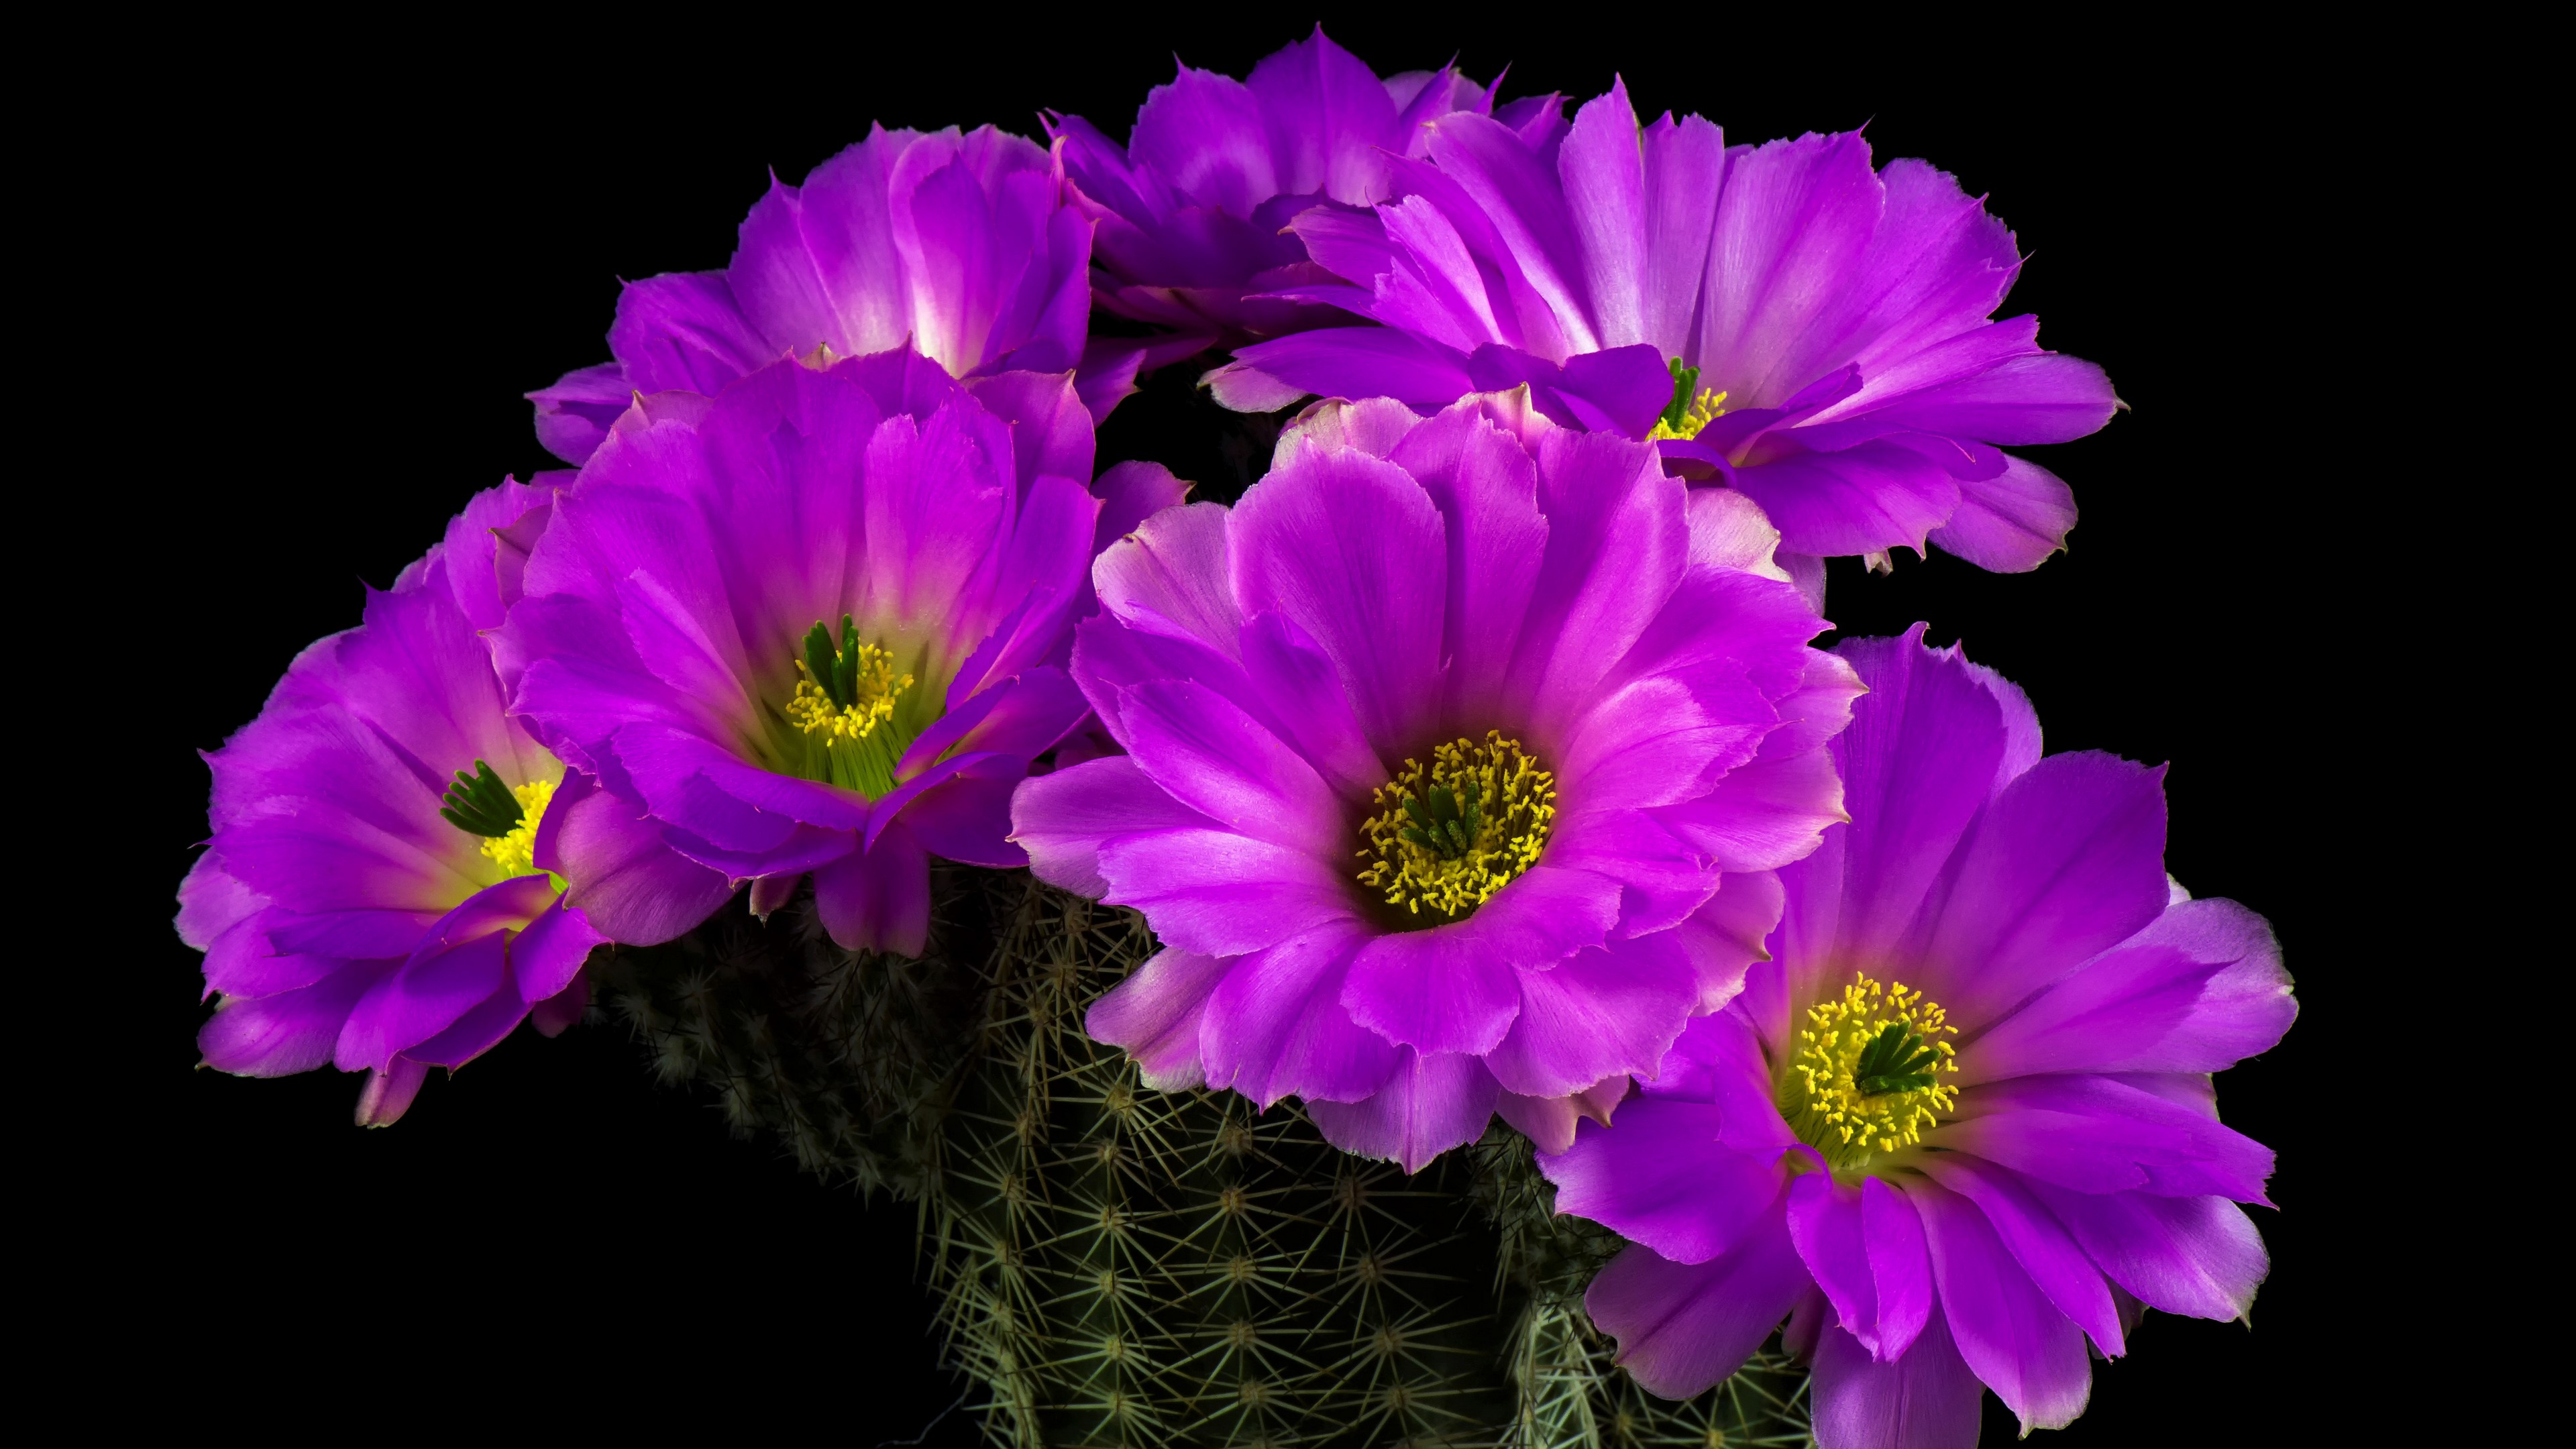 Free photo A cactus blooming with purple flowers